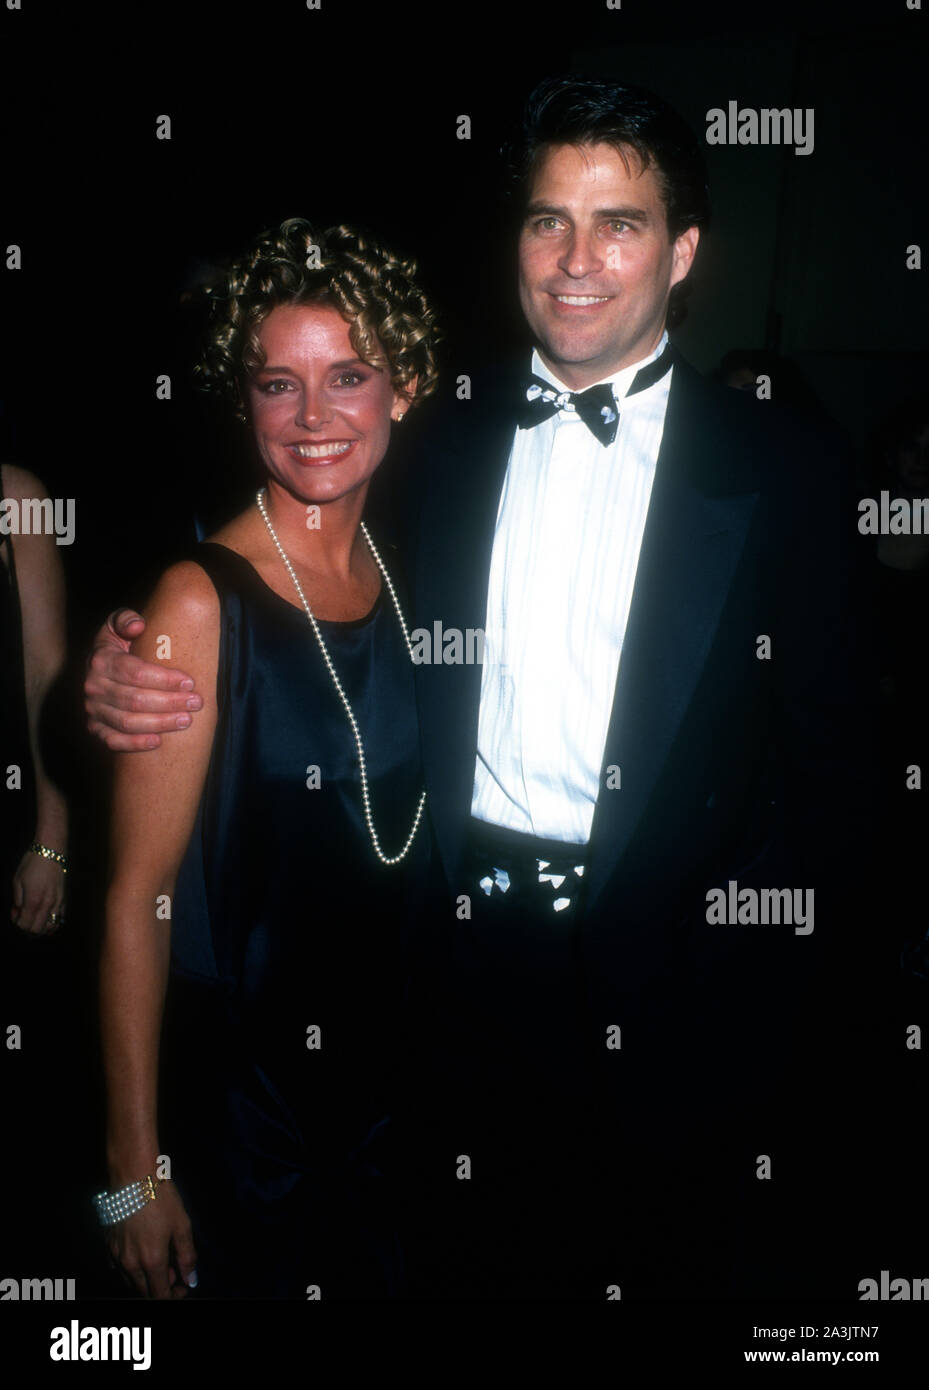 Los Angeles, California, USA 28th January 1995 Actress Amanda Bearse and actor Ted McGinley attend Married With Children 200th Episode Event on January 28, 1995 in Los Angeles, California, USA. Photo by Barry King/Alamy Stock Photo Stock Photo